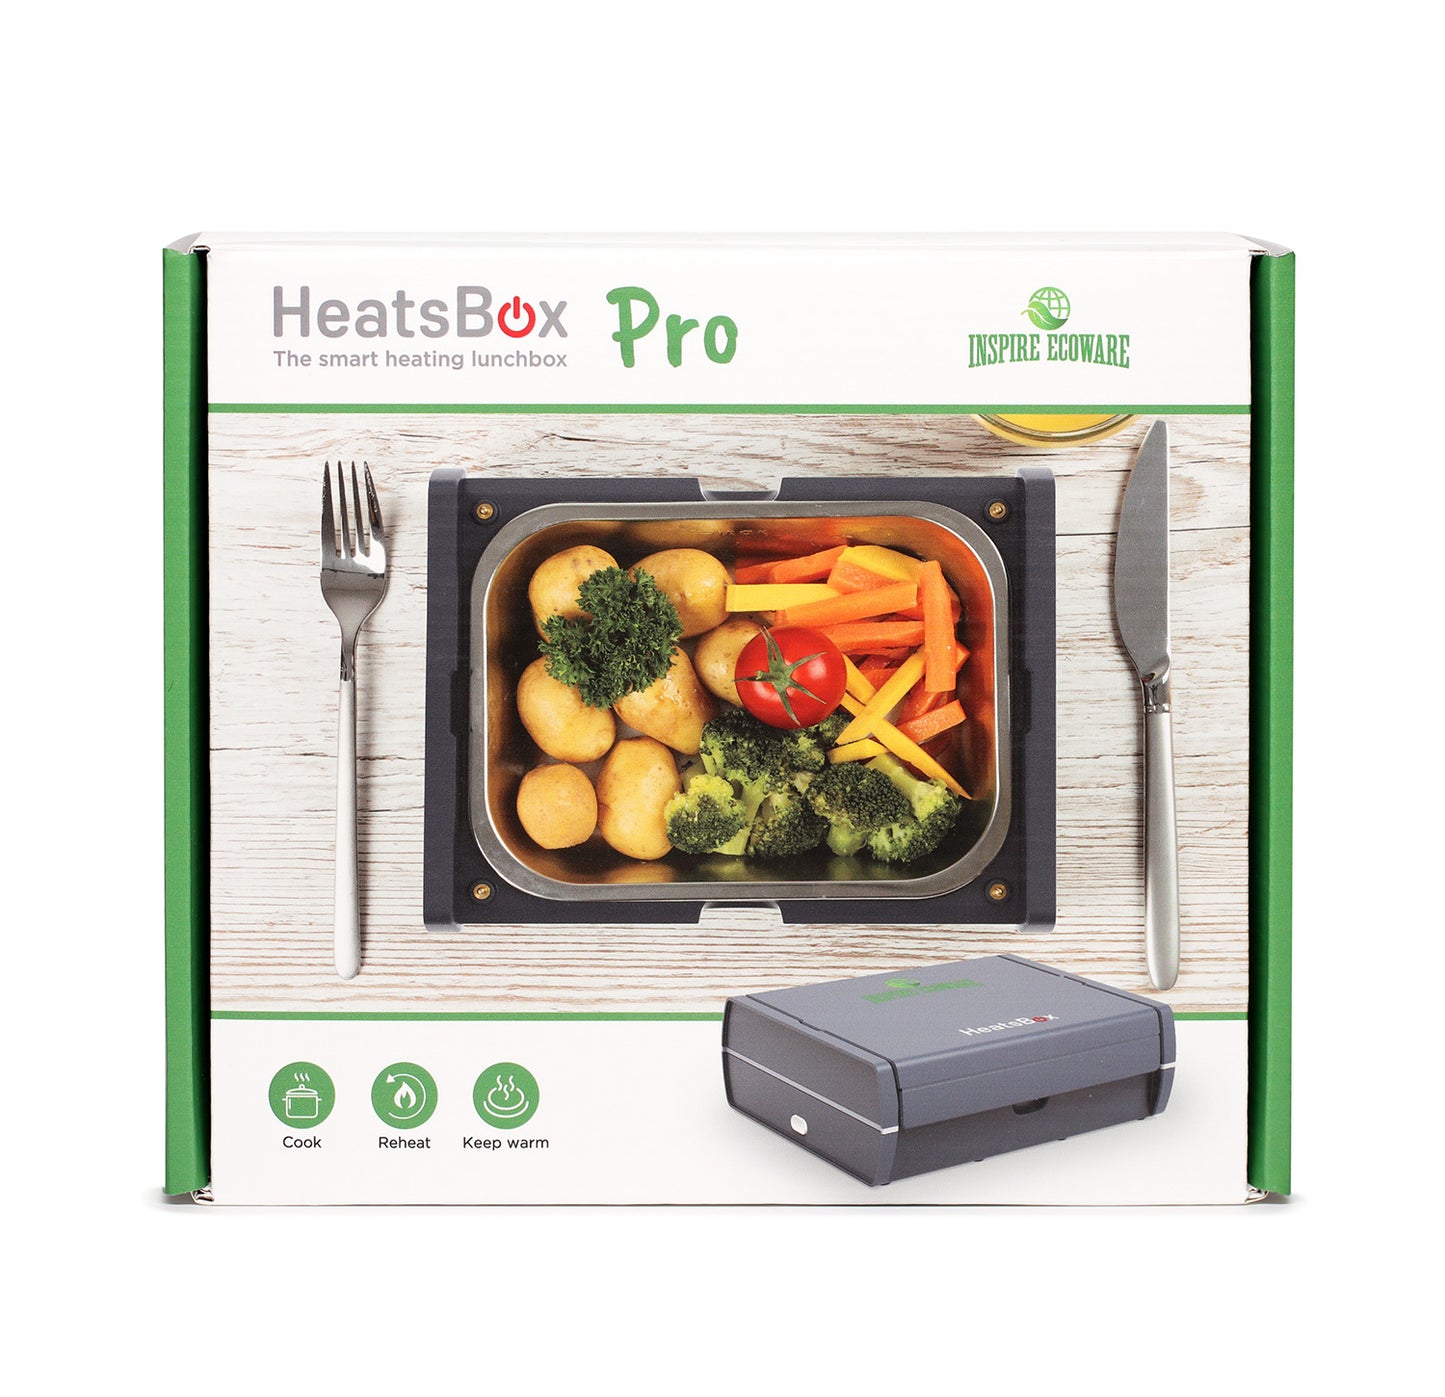 Heatbox Delivers Hot Lunch Anywhere & Everywhere